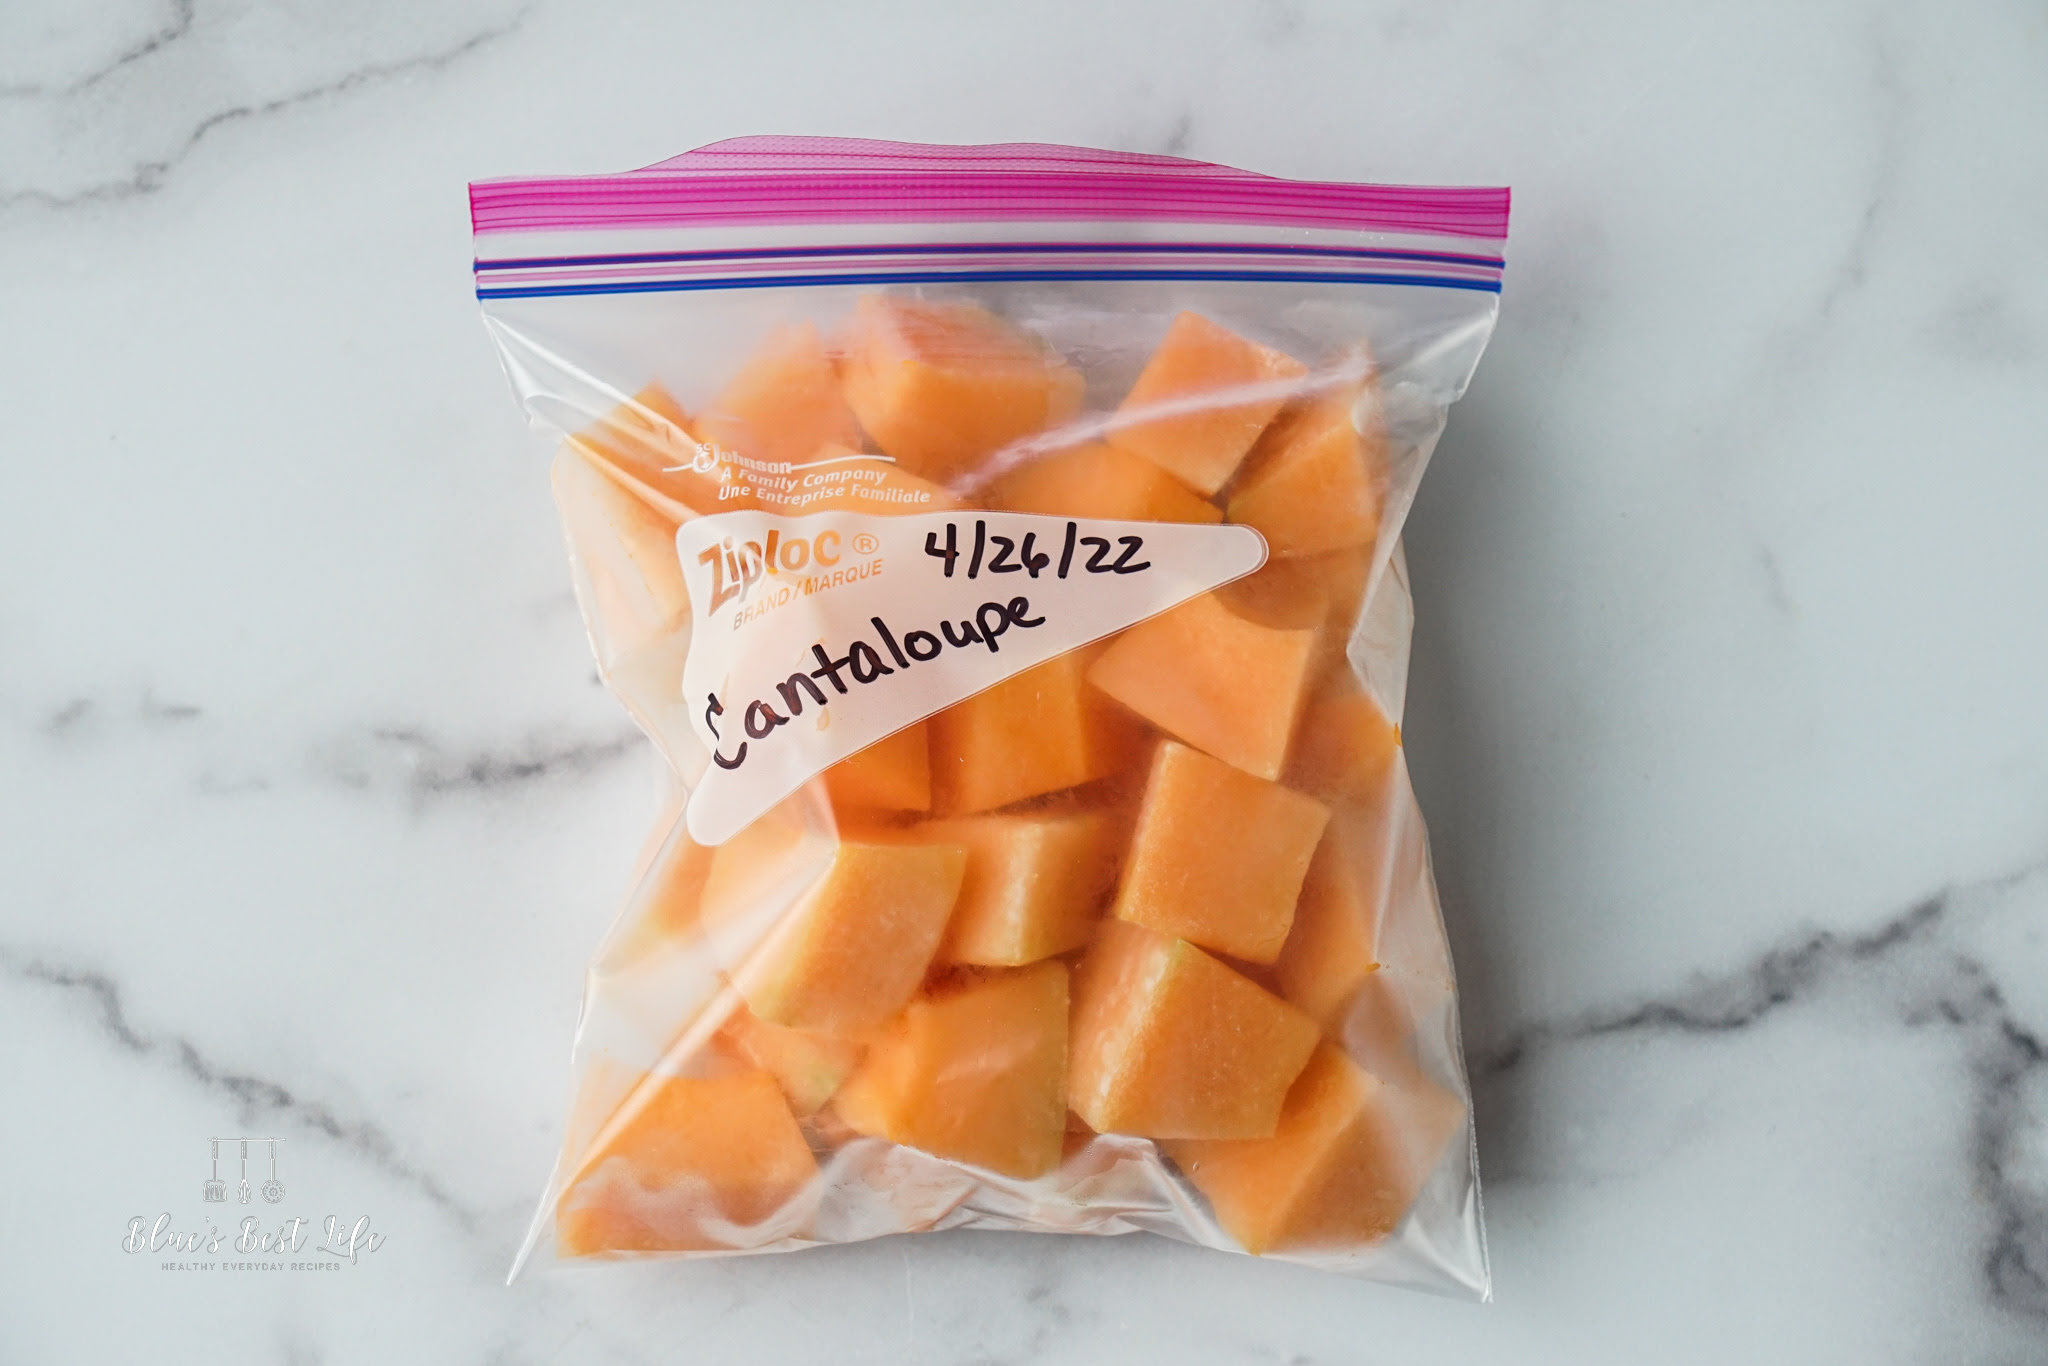 How To Store Cantaloupe